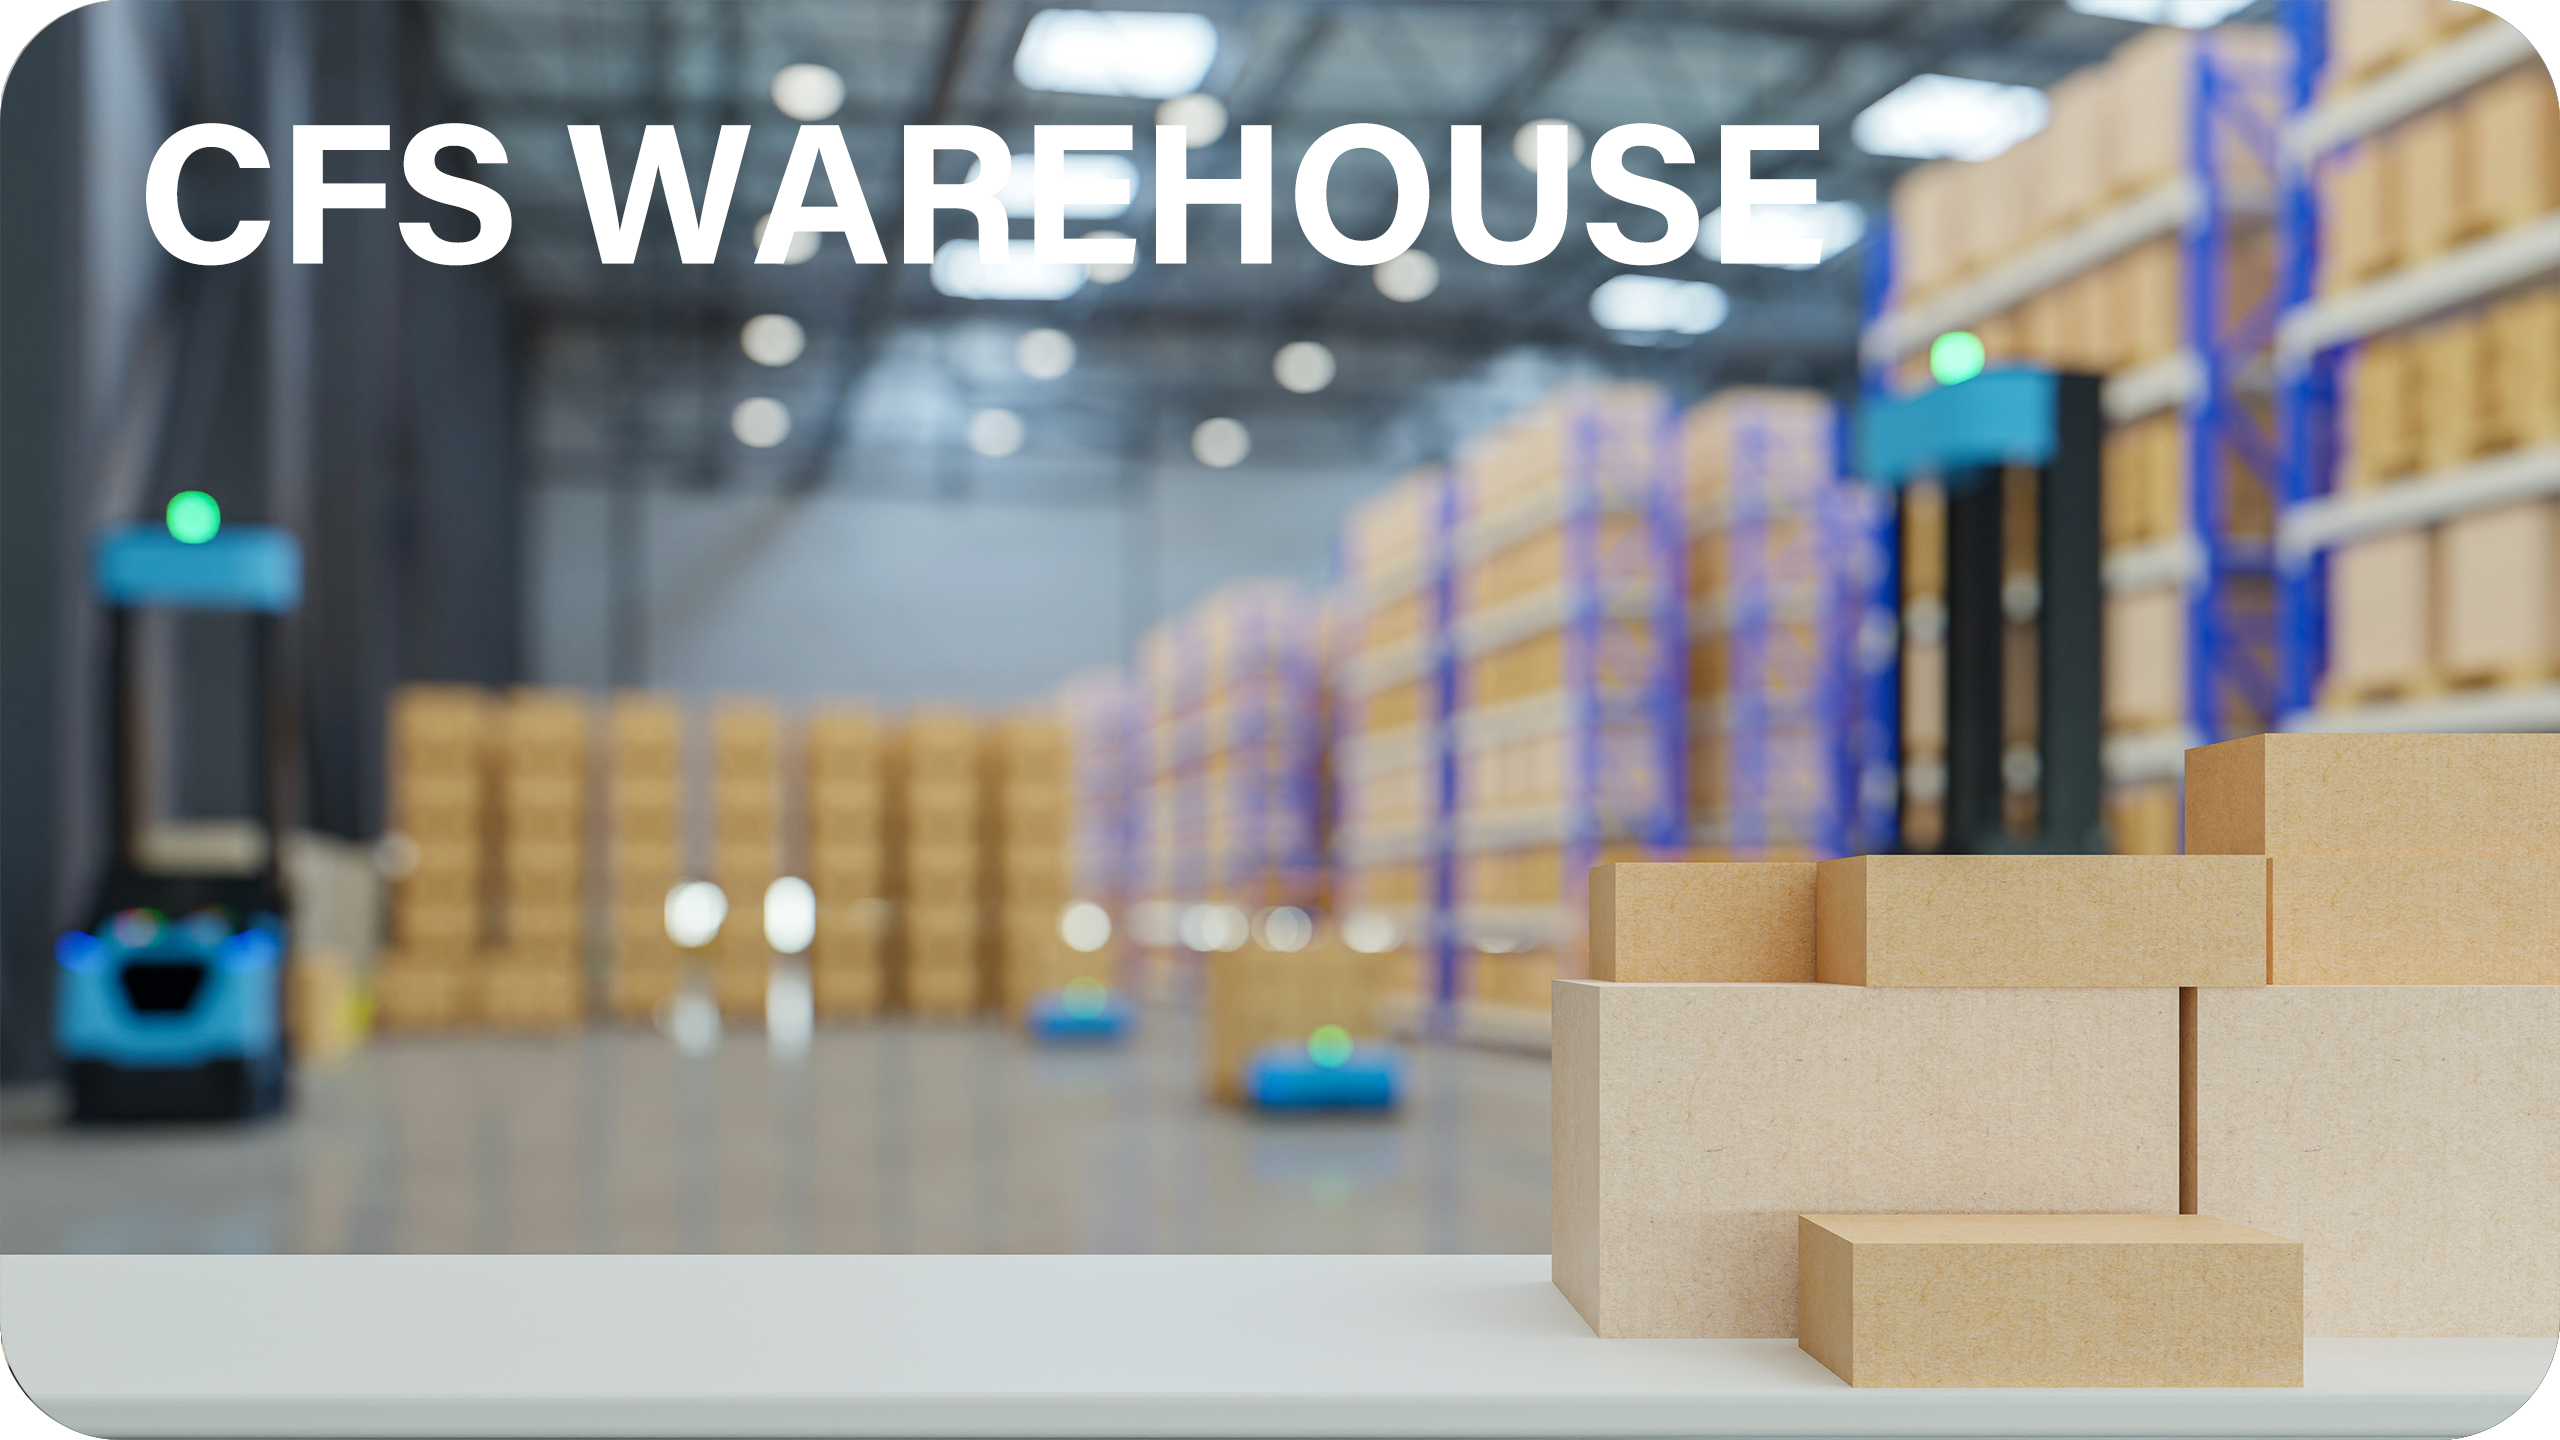 Best Ways You Can Benefit from Improved Firm with CFS Warehouse